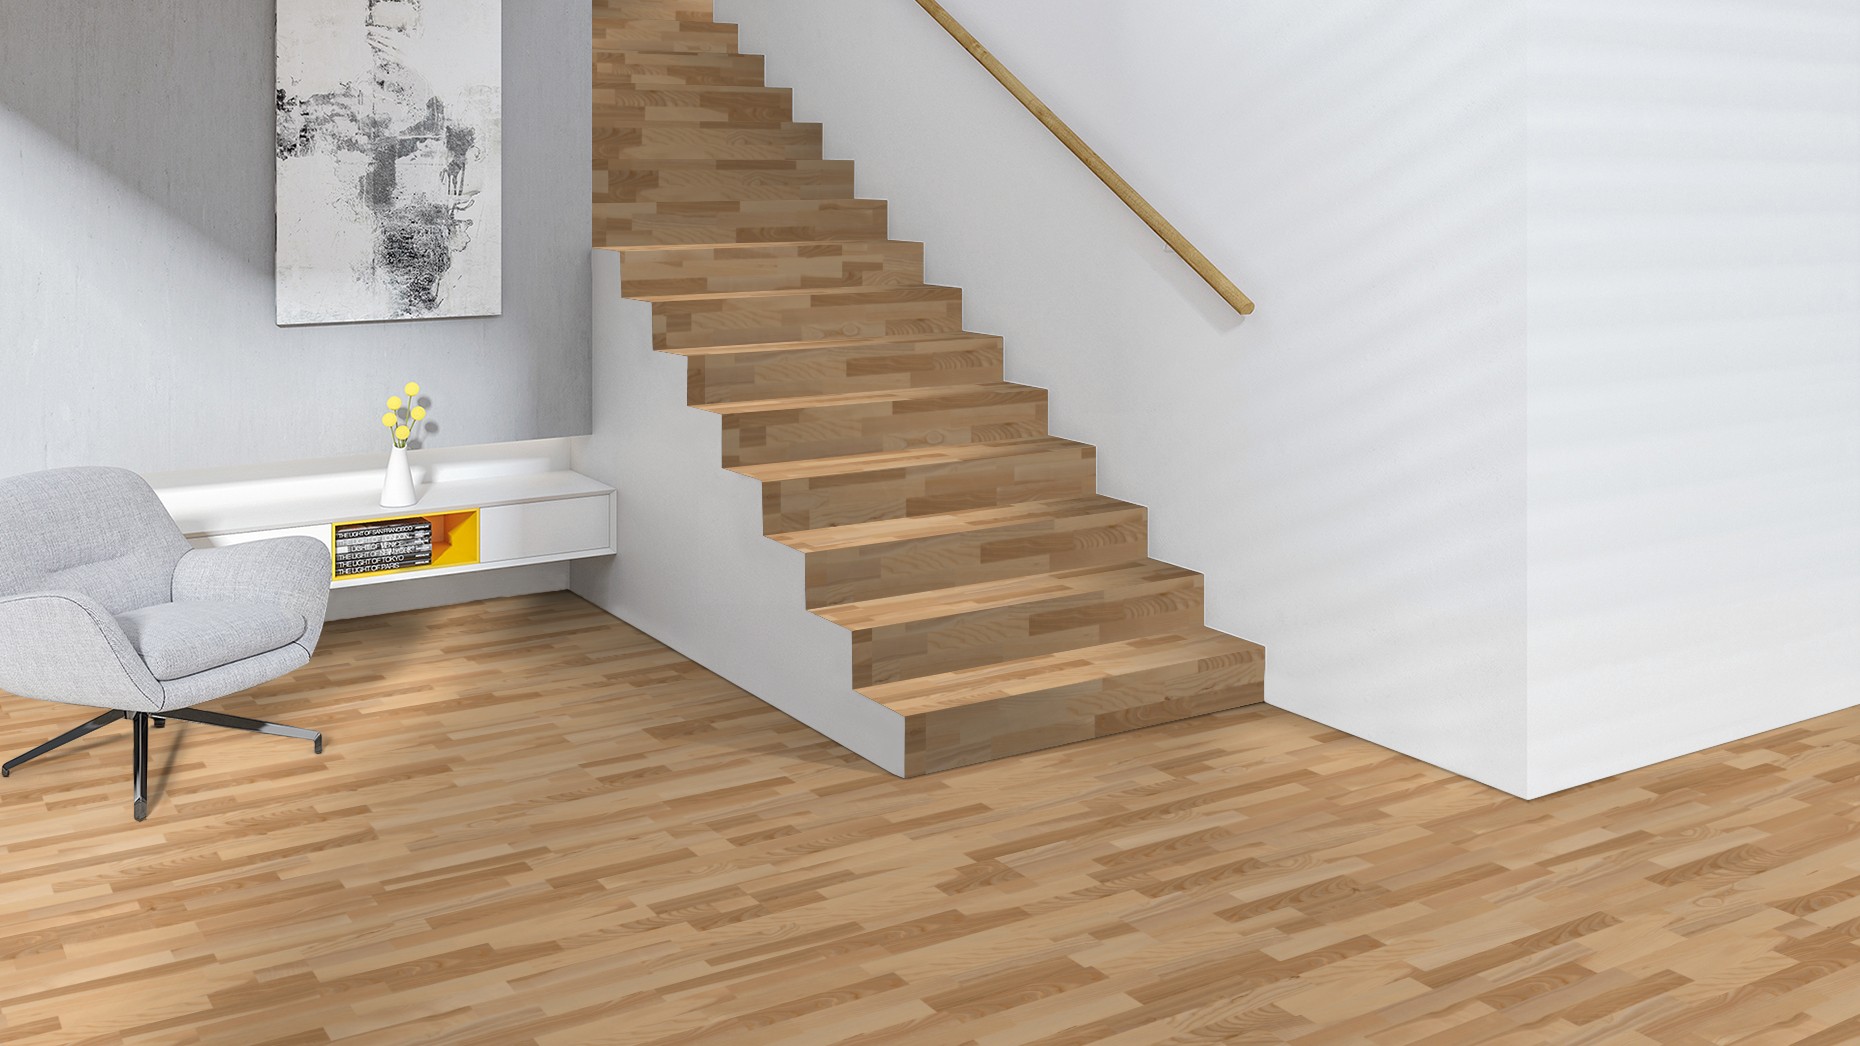 The made-to-measure parquet solution for your staircase. 